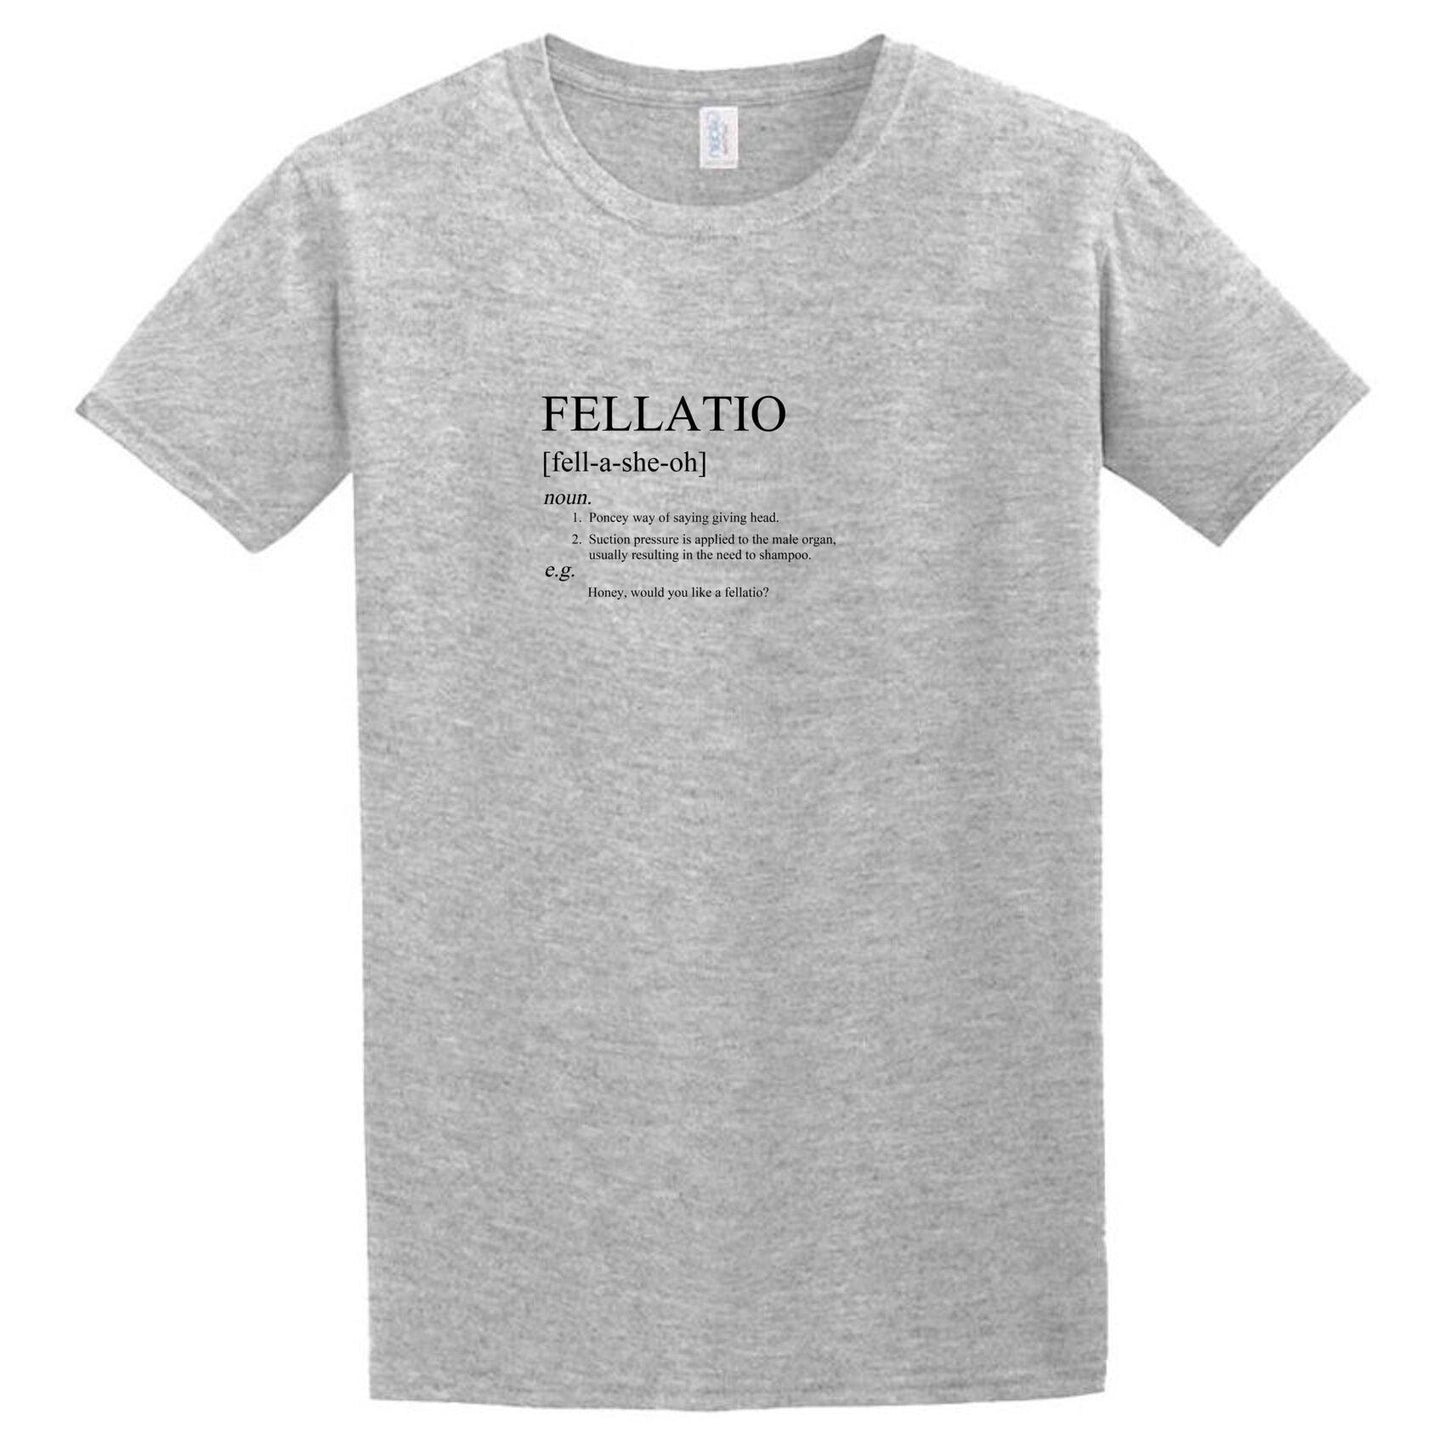 A grey Fellatio T-Shirt that says Twisted Gifts.